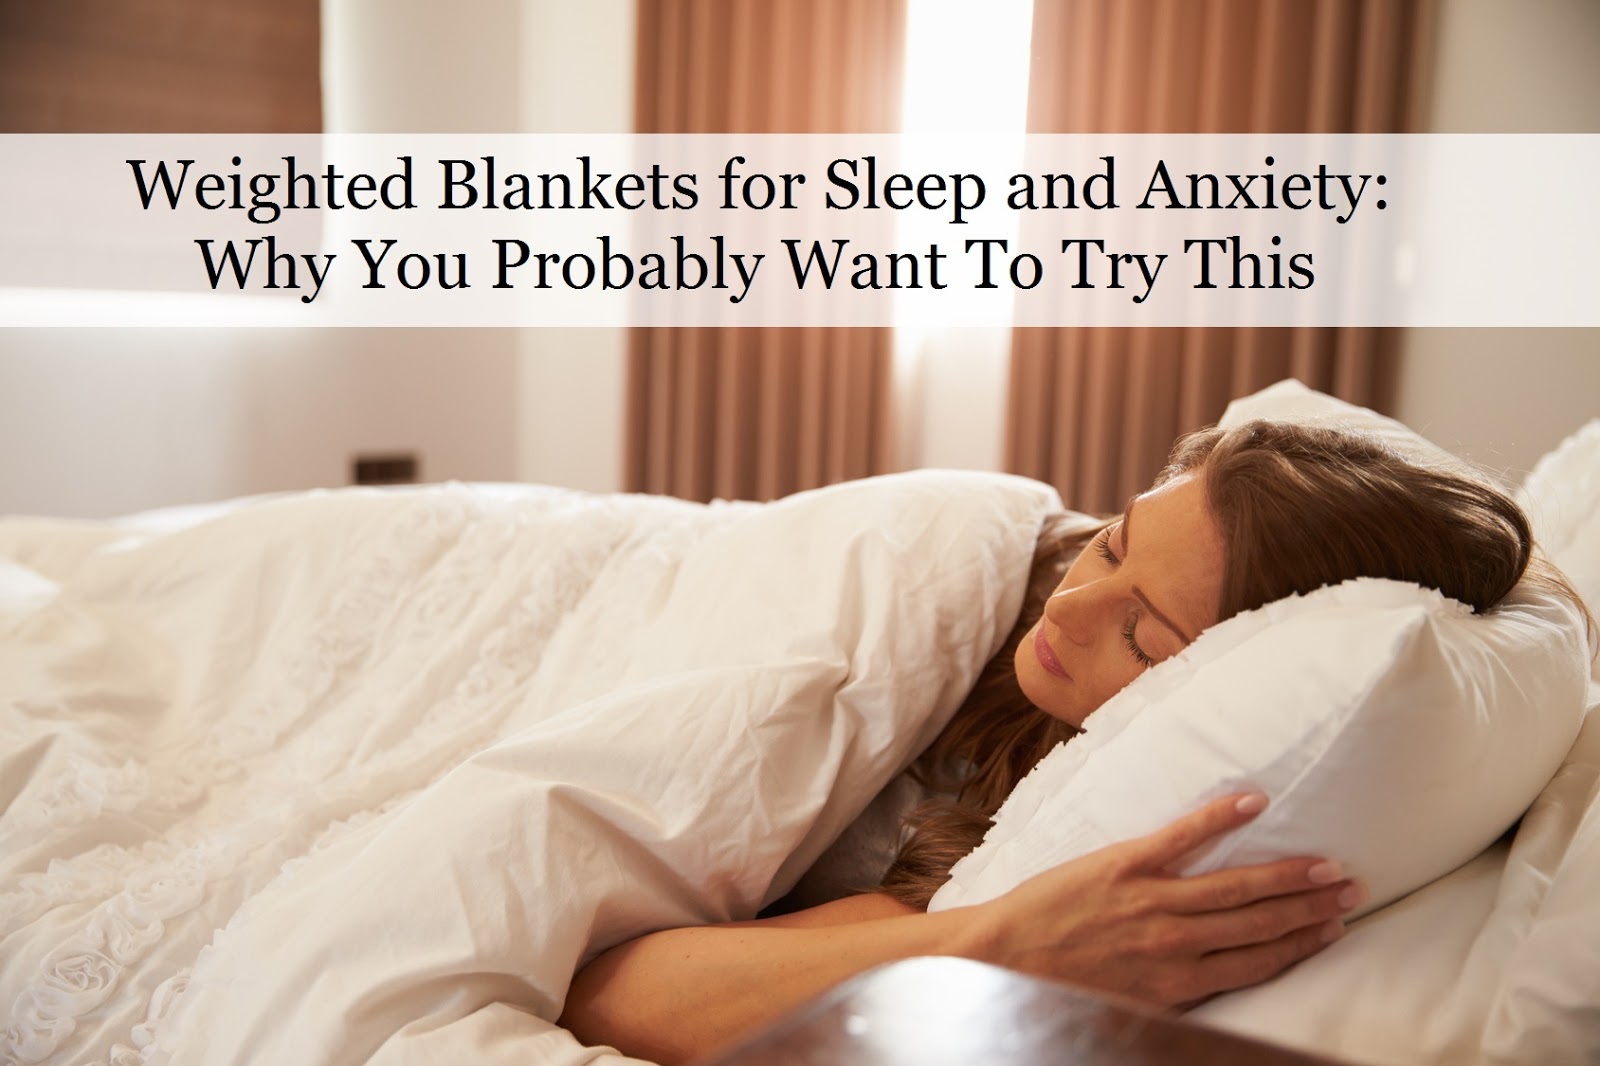 Weighted Blankets for Sleep and Anxiety: Why You Probably Want To Try